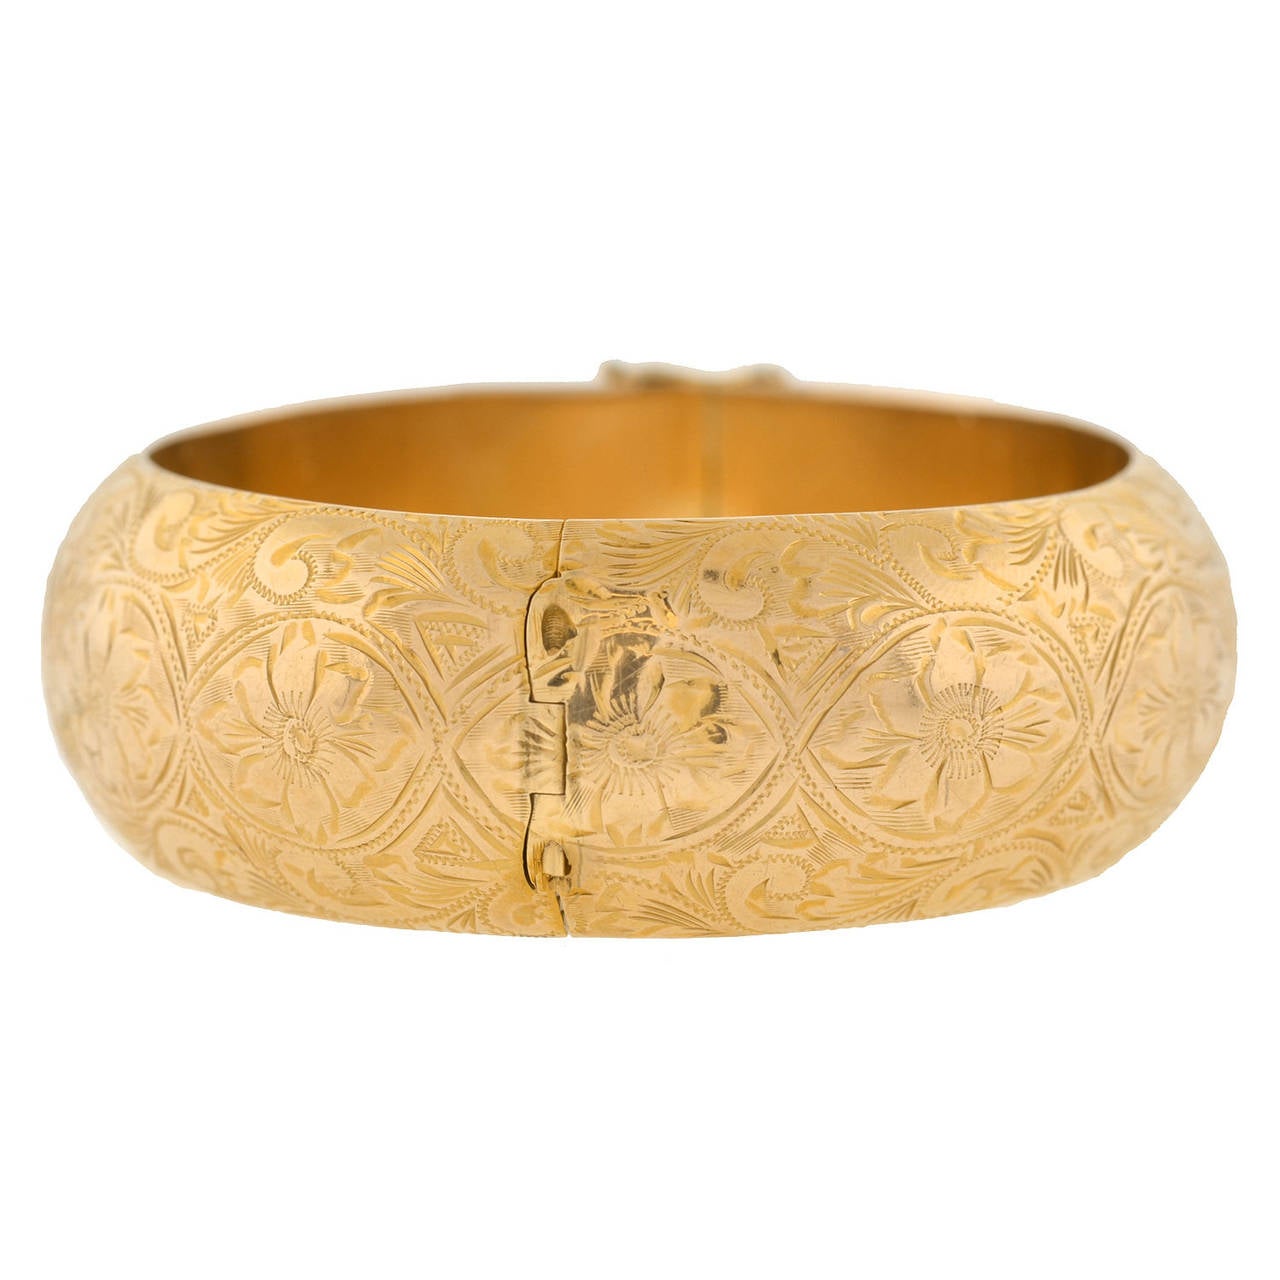 A fantastic Victorian Revival bracelet from the Retro (ca1940) era! This beautiful 14kt yellow gold piece is particularly wide and has a fine etched floral design which carries around the entire surface of the bracelet. The flowing feminine design